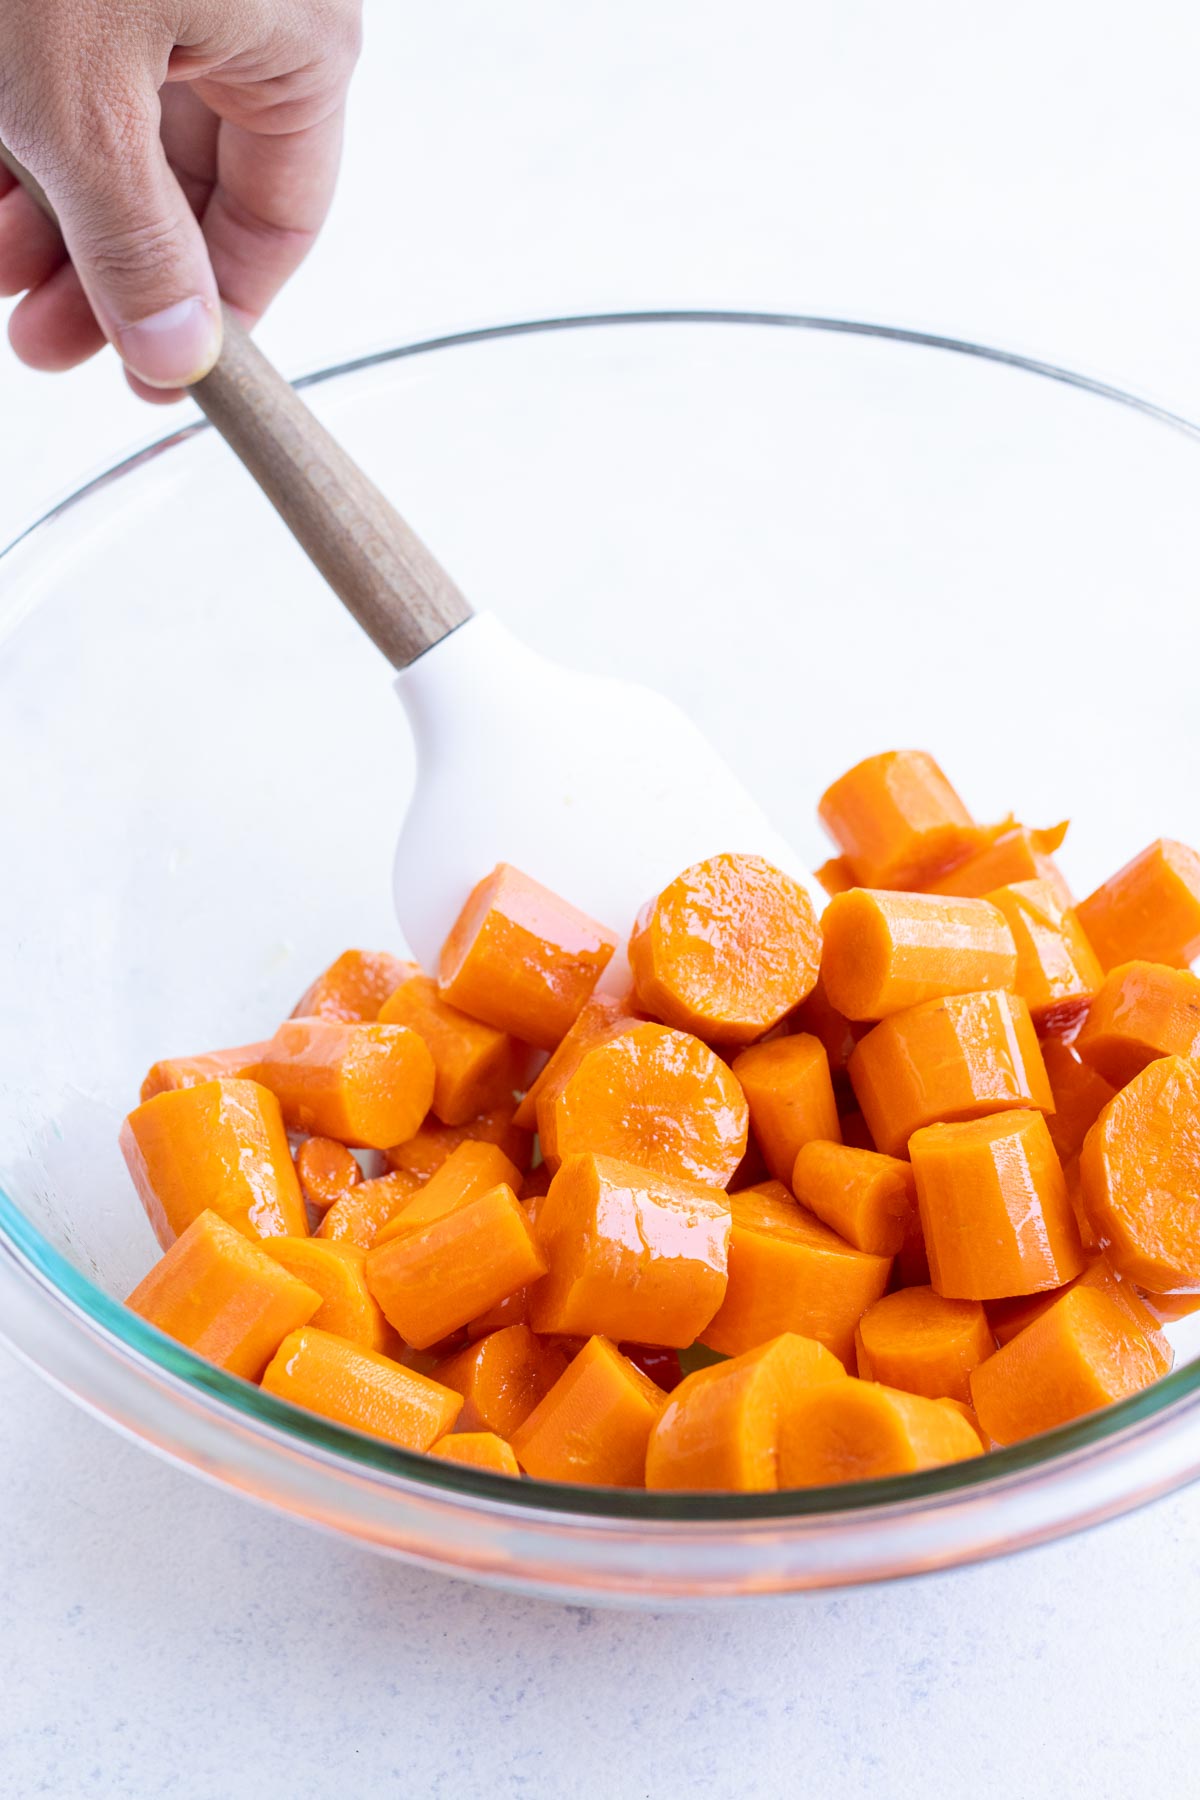 Sliced carrots are covered in oil in a bowl.